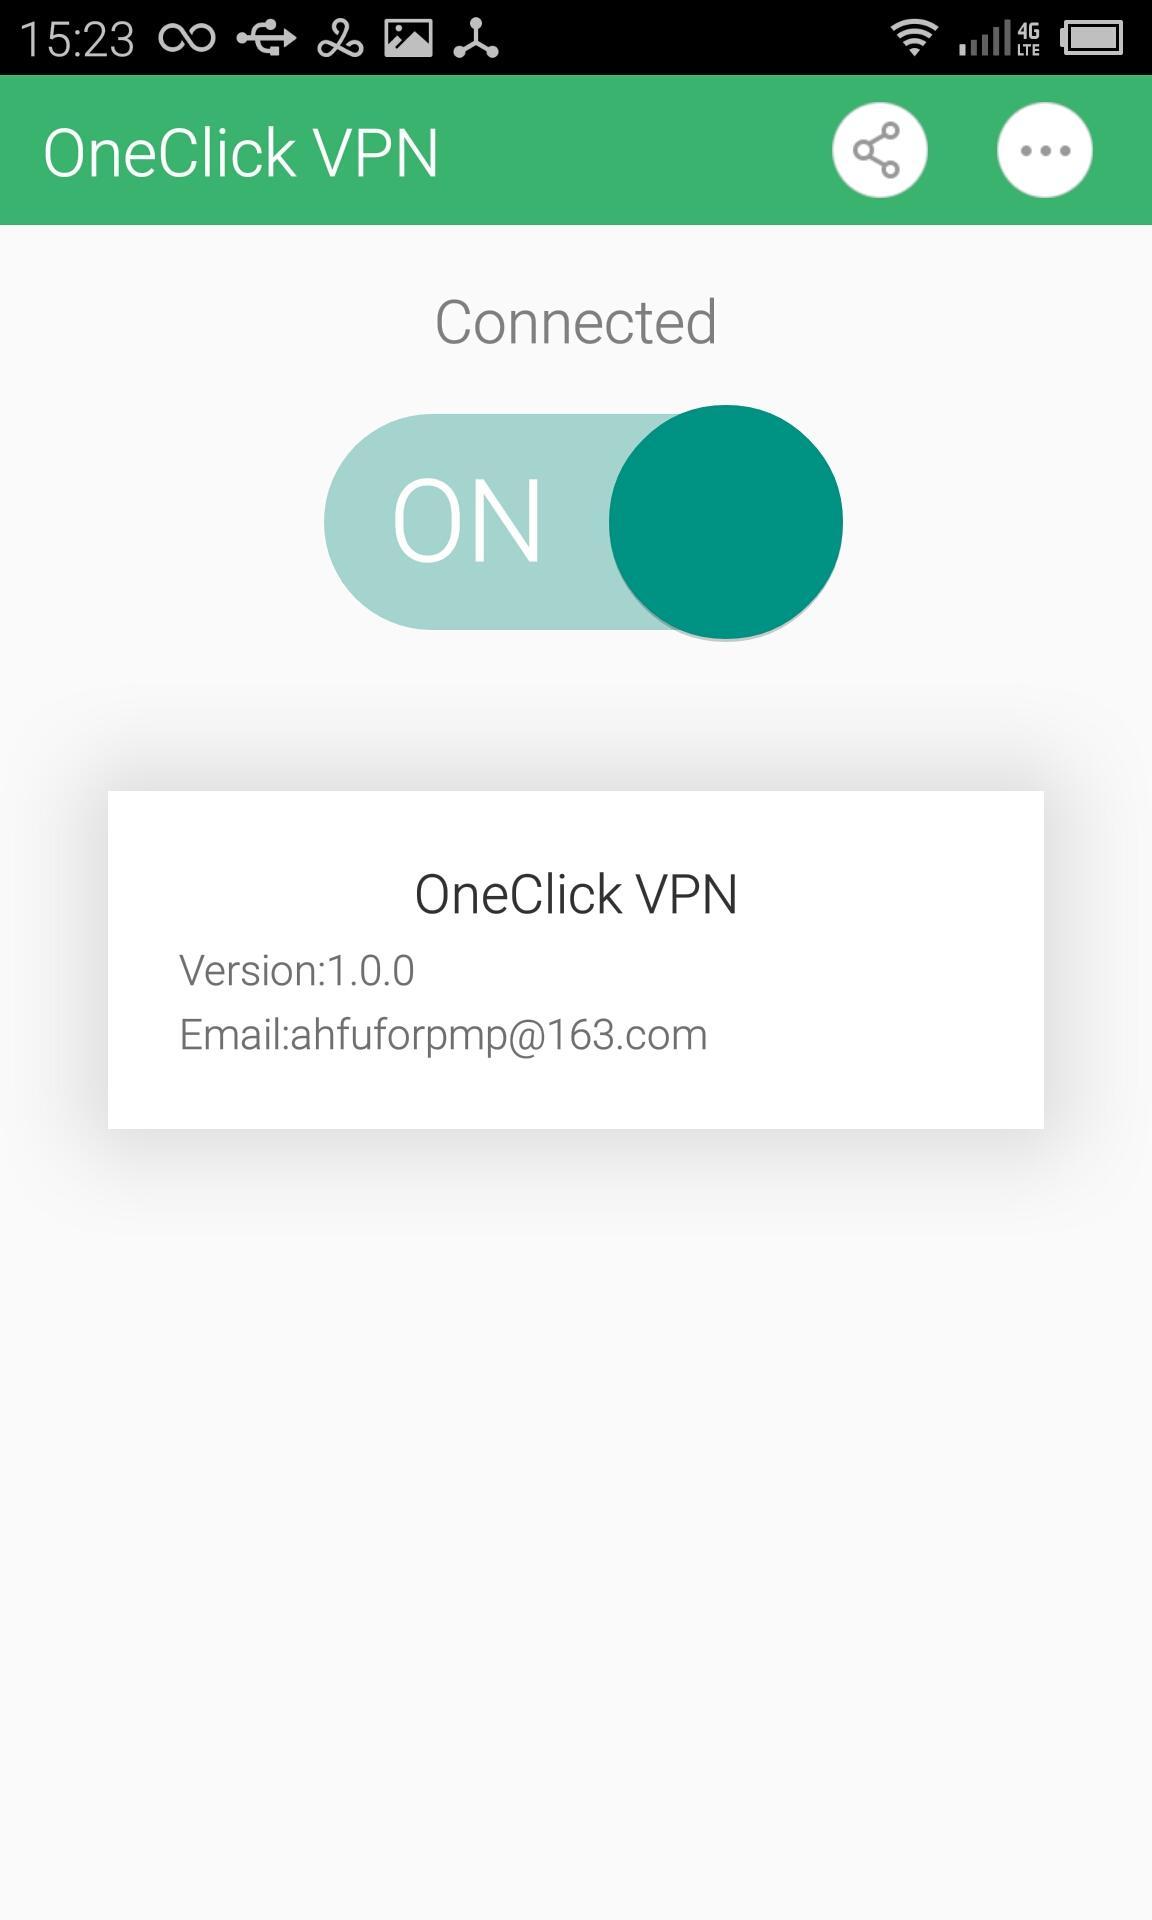 crack vpn one click android